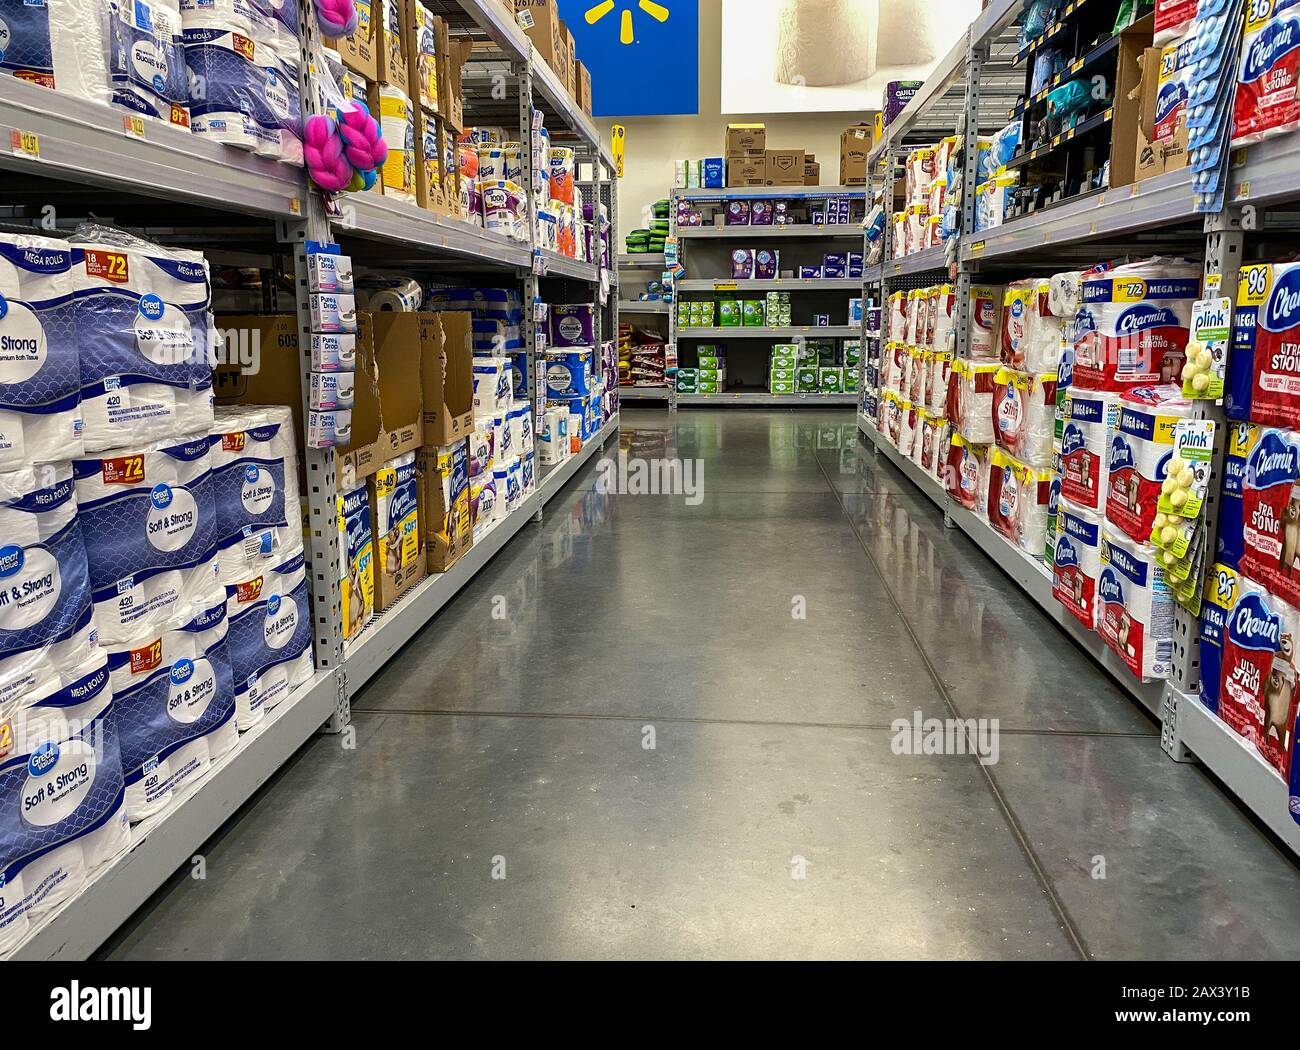 Orlando,FL/USA -2/6/20: The Toilet Paper aisle of a Walmart Superstore with  a variety of products from various manufacturers Stock Photo - Alamy